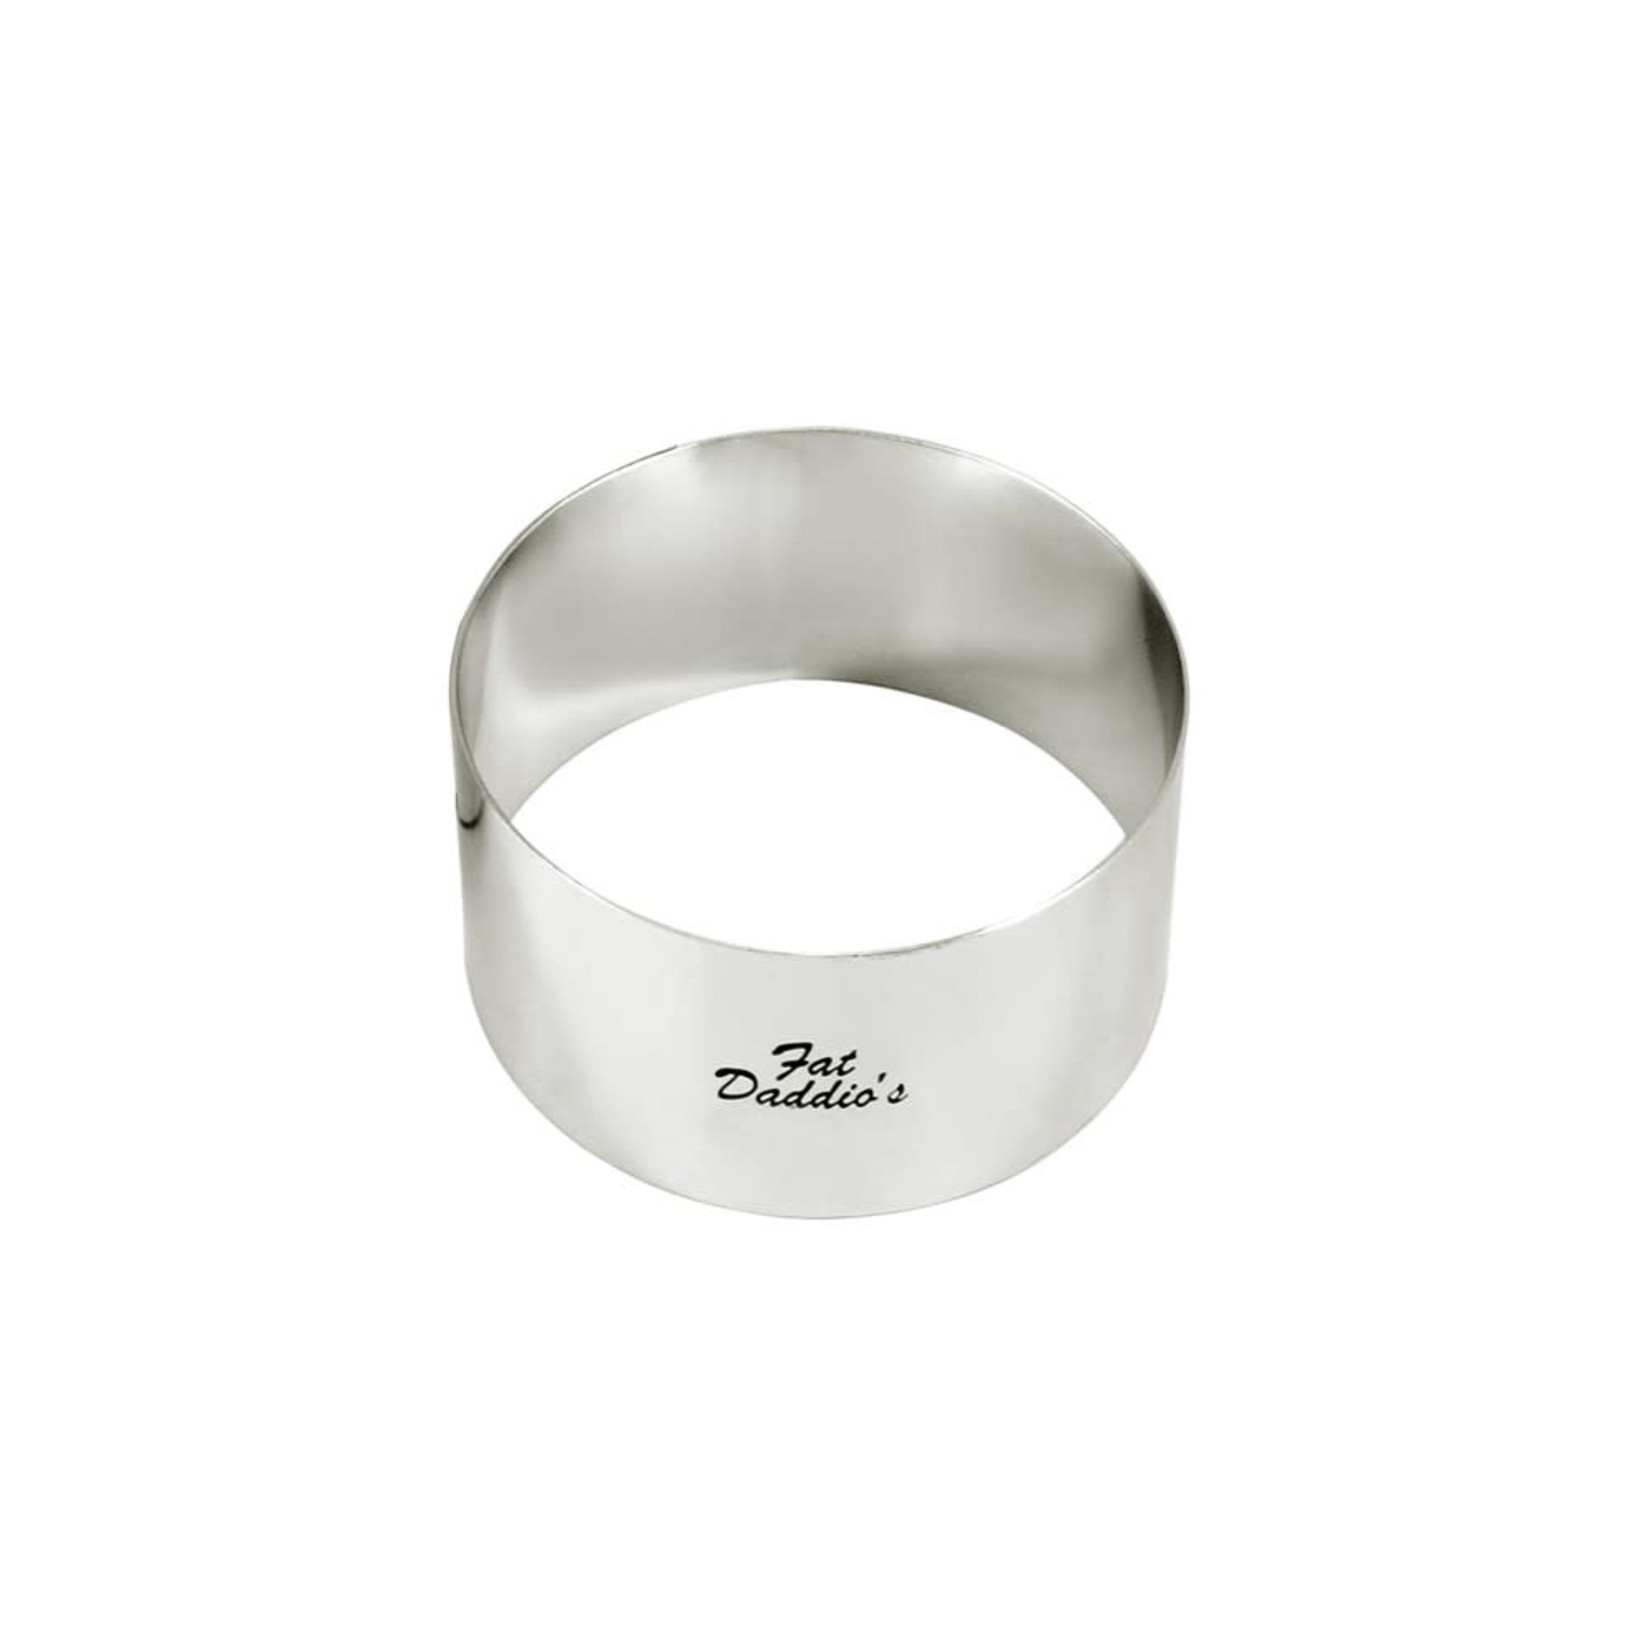 Fat Daddios Fat Daddios - Ring Stainless Steel - 2.75 x 1.75"